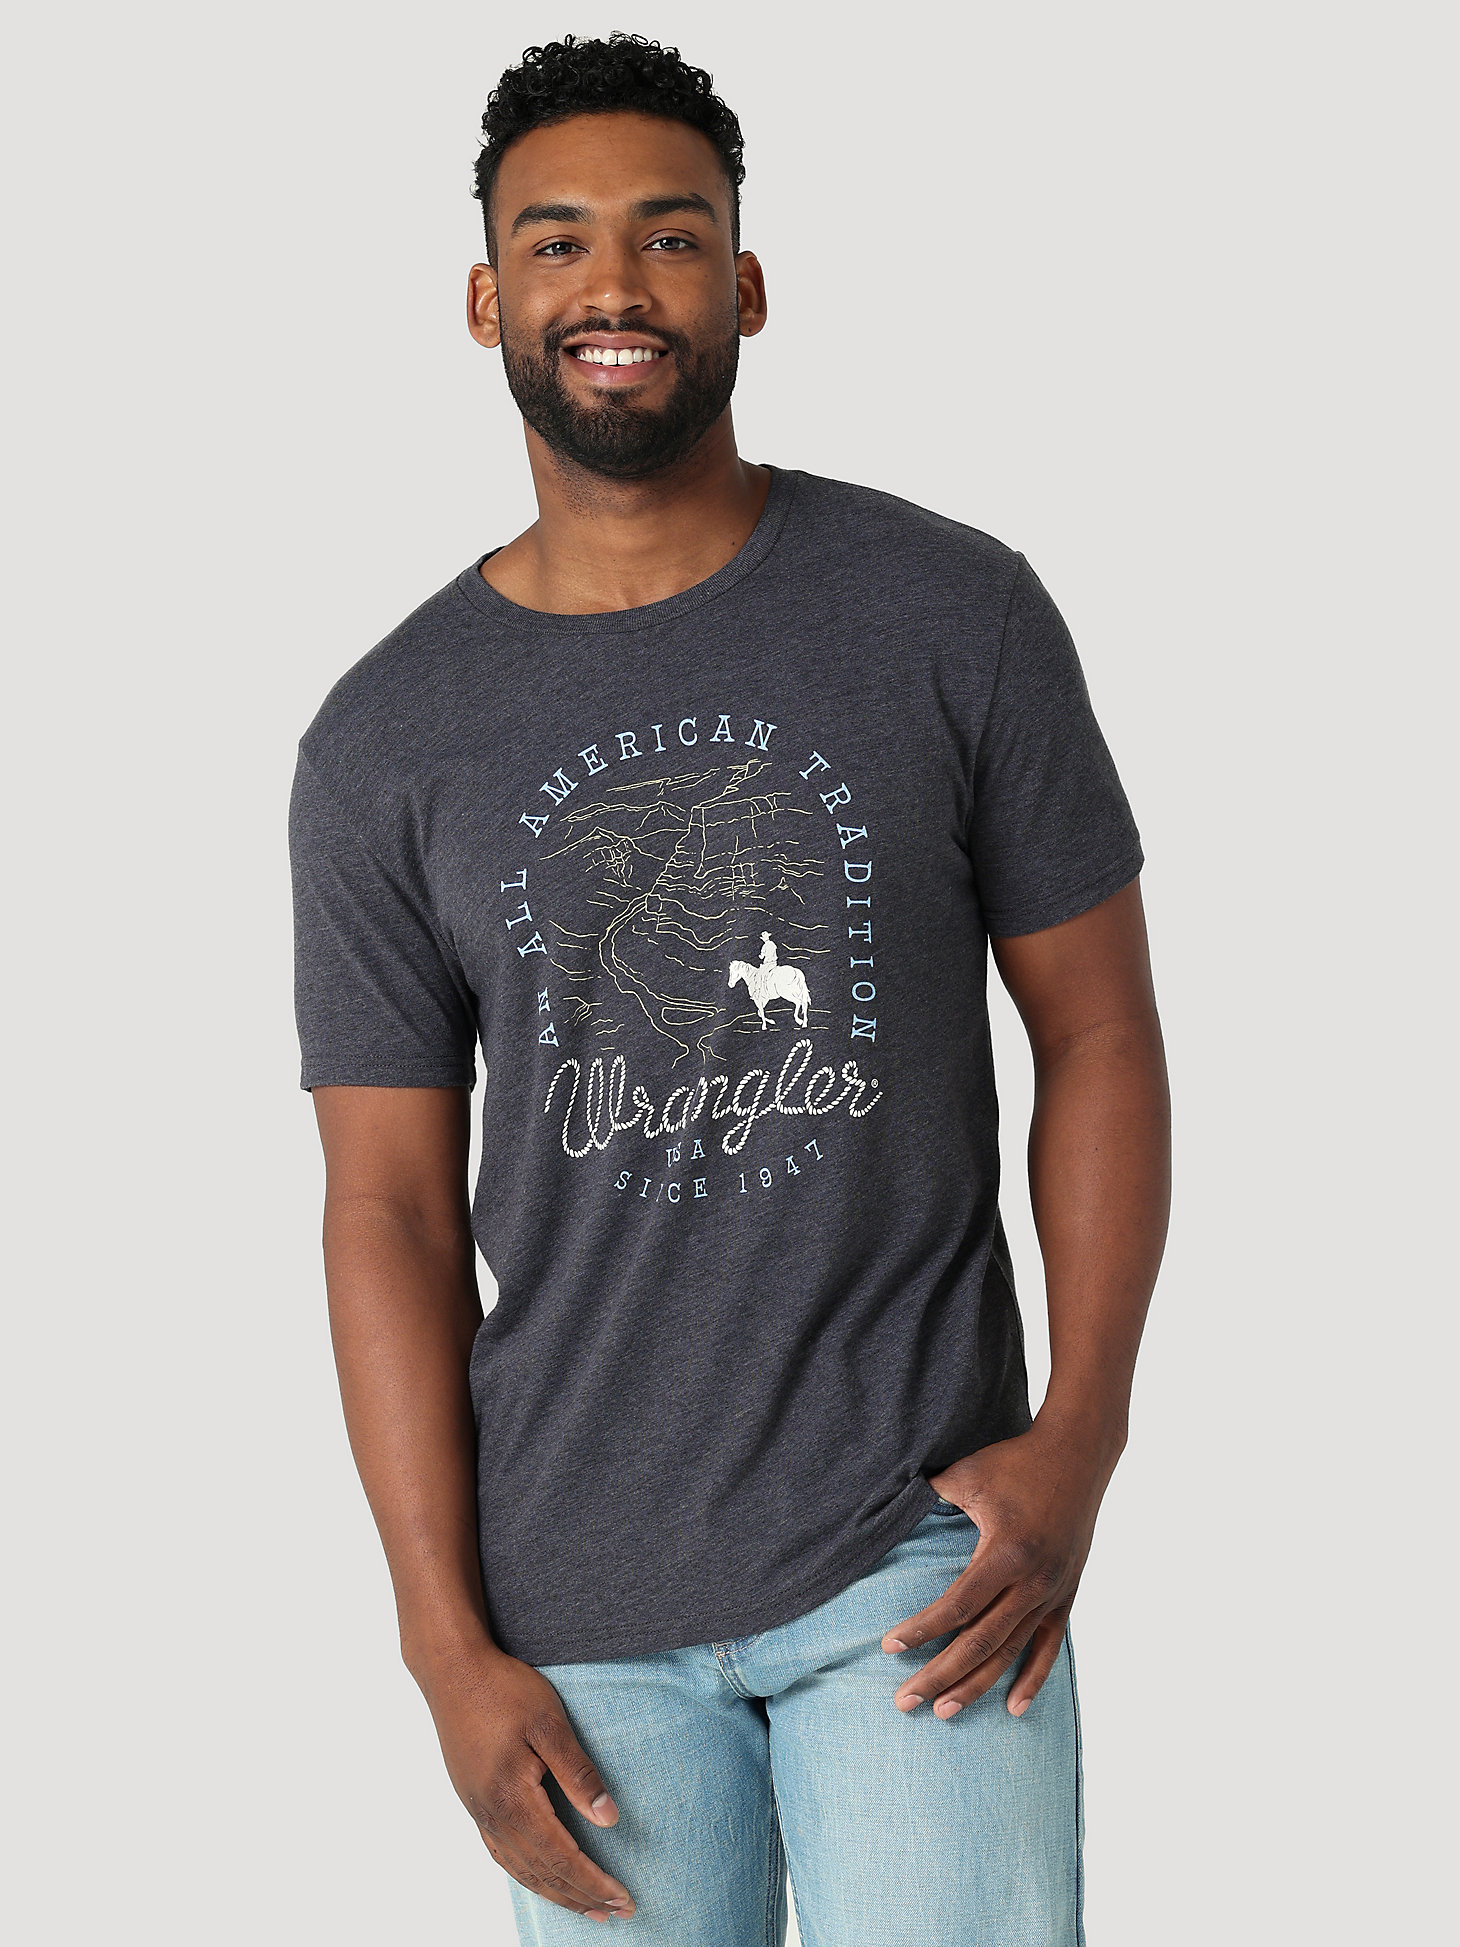 Men's All American Tradition Wrangler T-Shirt in Charcoal Heather main view